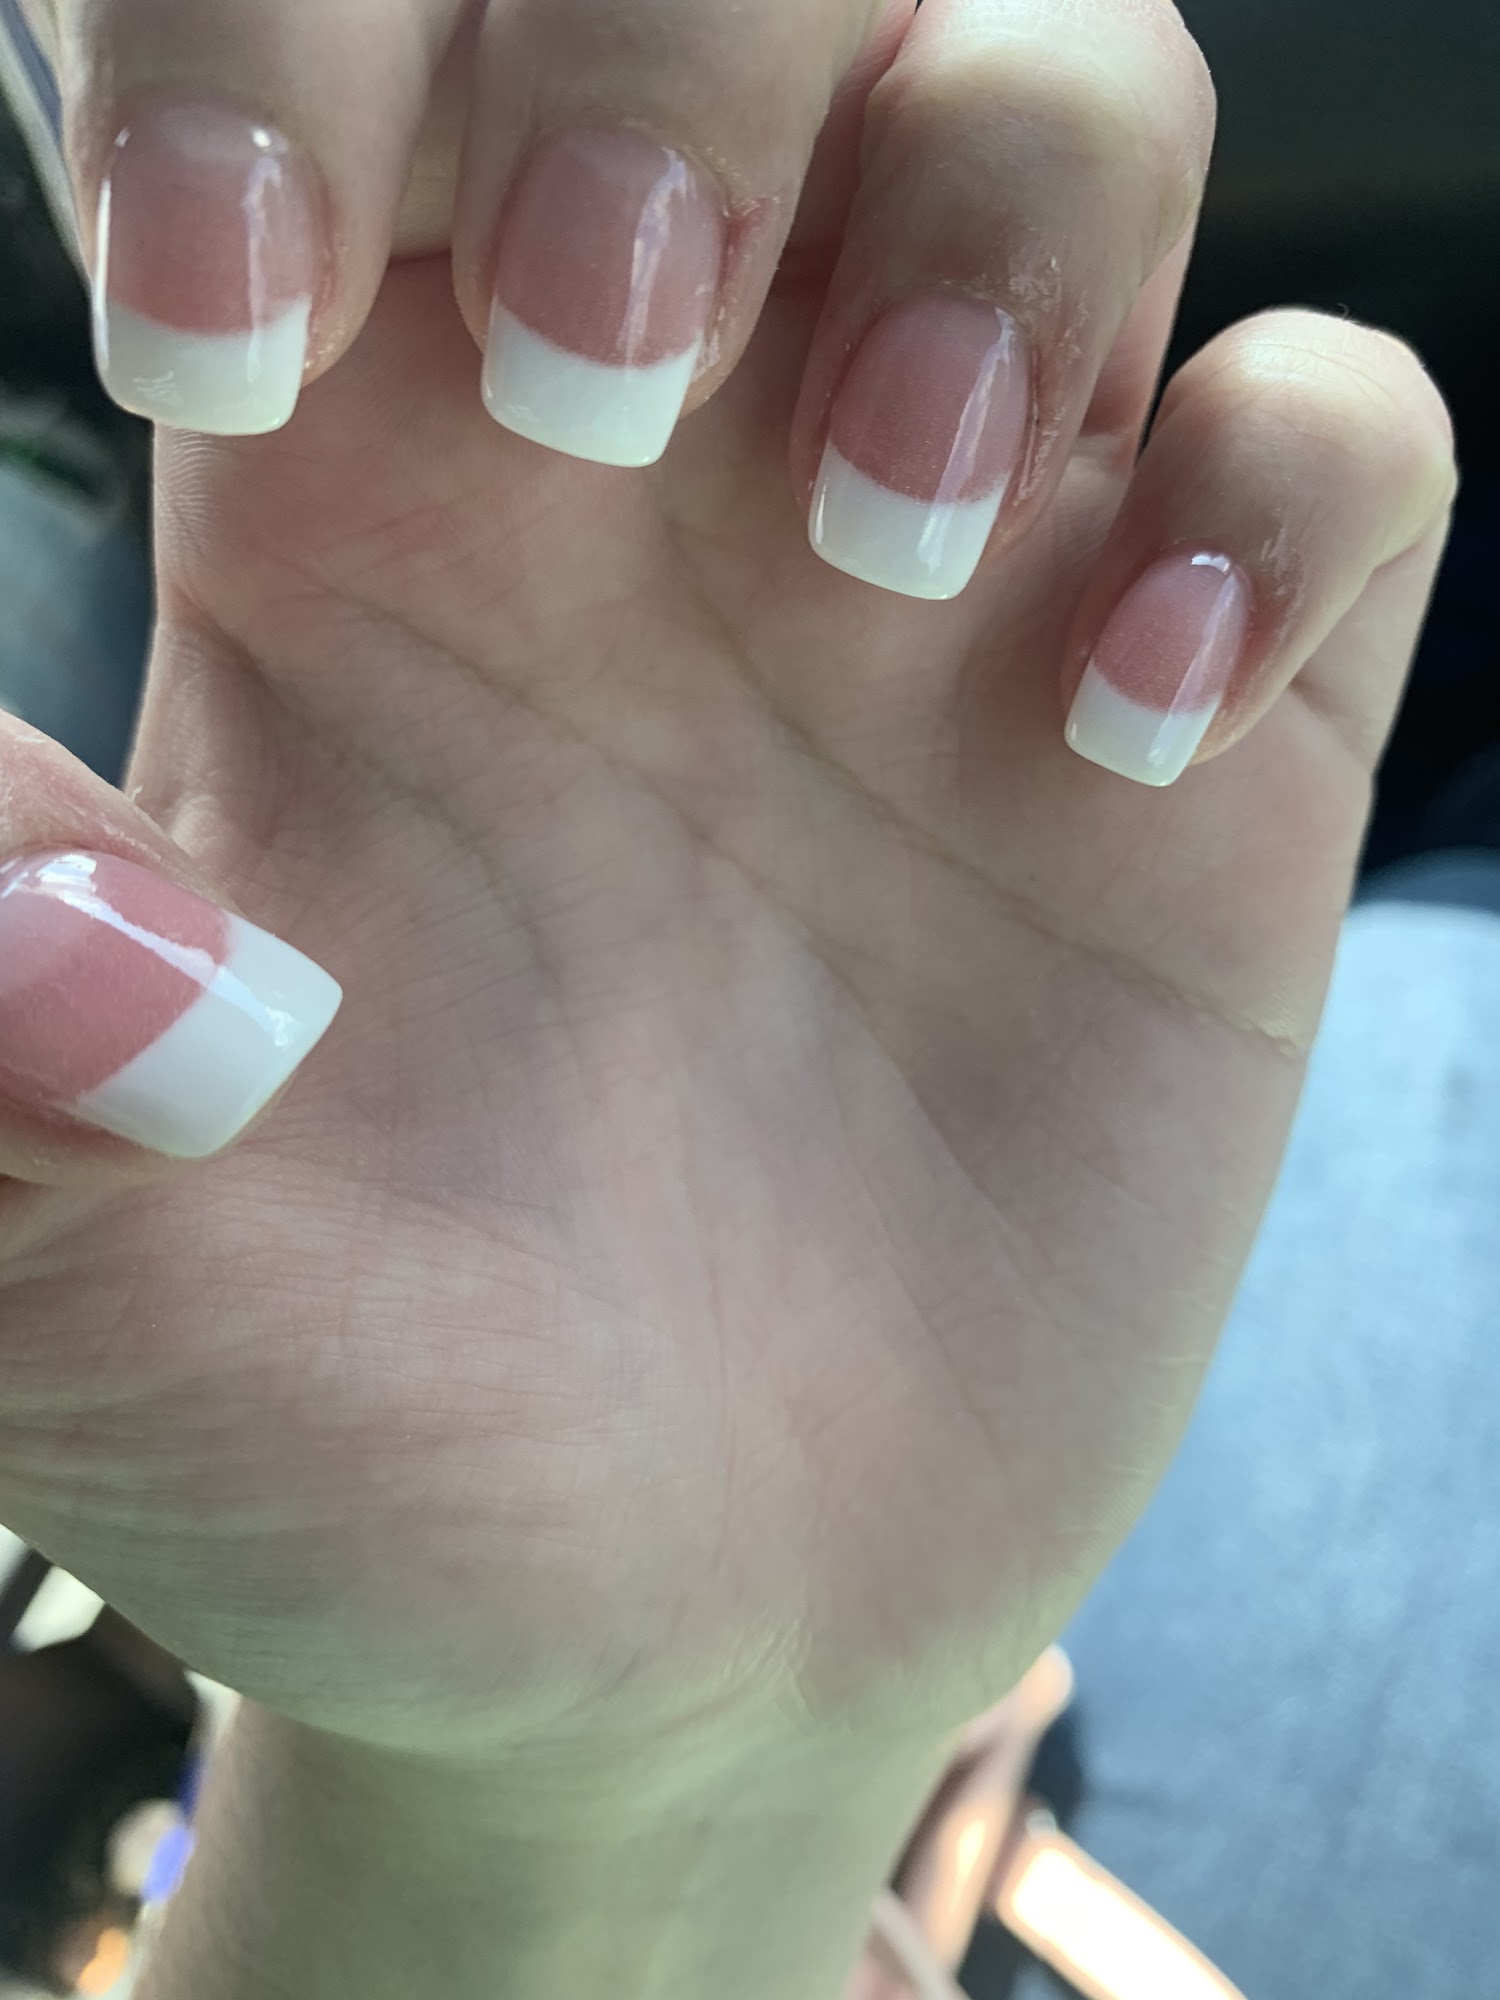 Magnolia Nails and Spa 1026 Ellington Dr, Milan Tennessee 38358